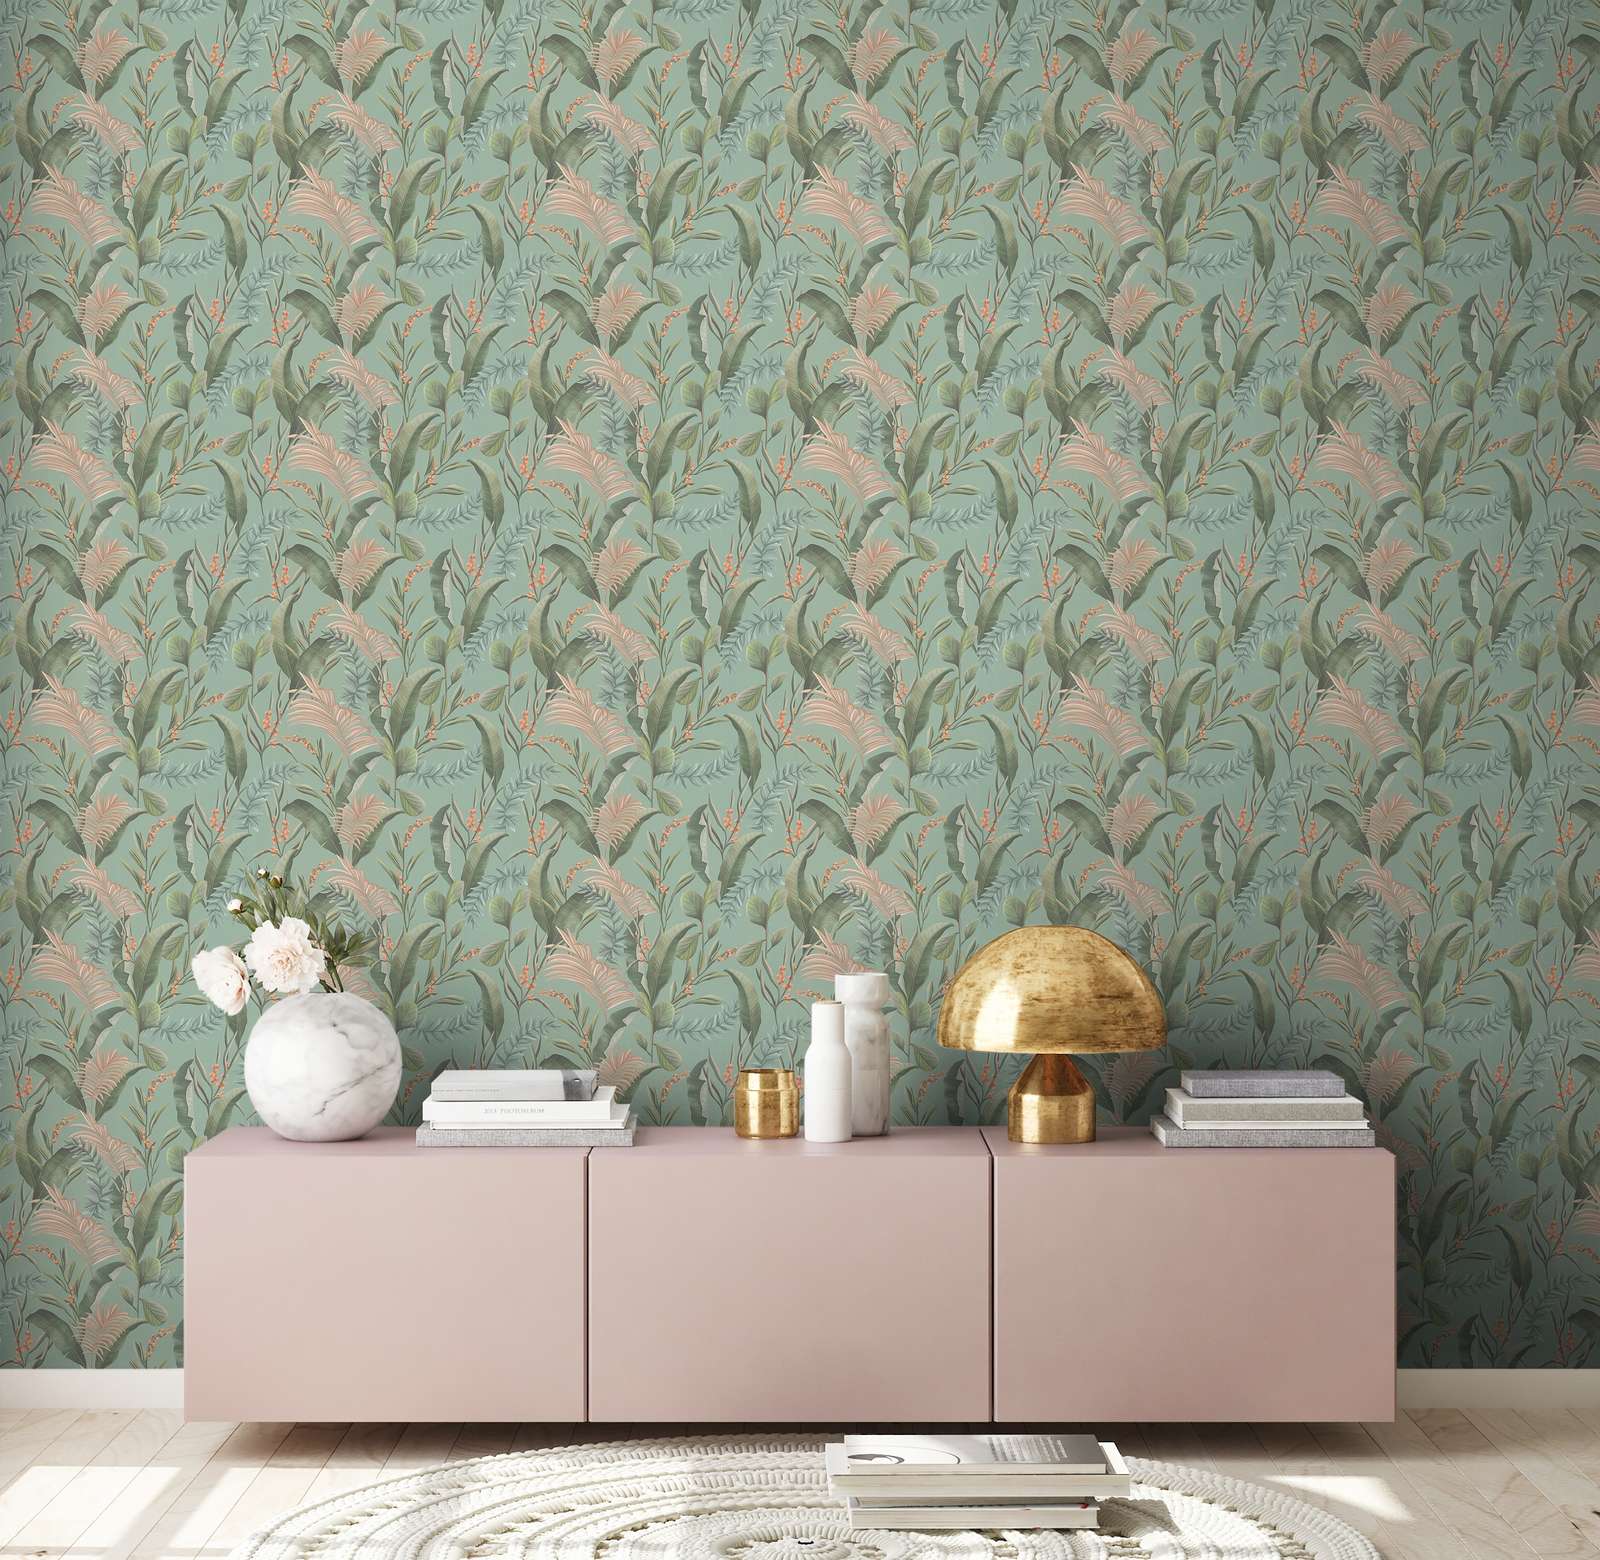             Floral style jungle wallpaper with leaves textured matt - blue, green, beige
        